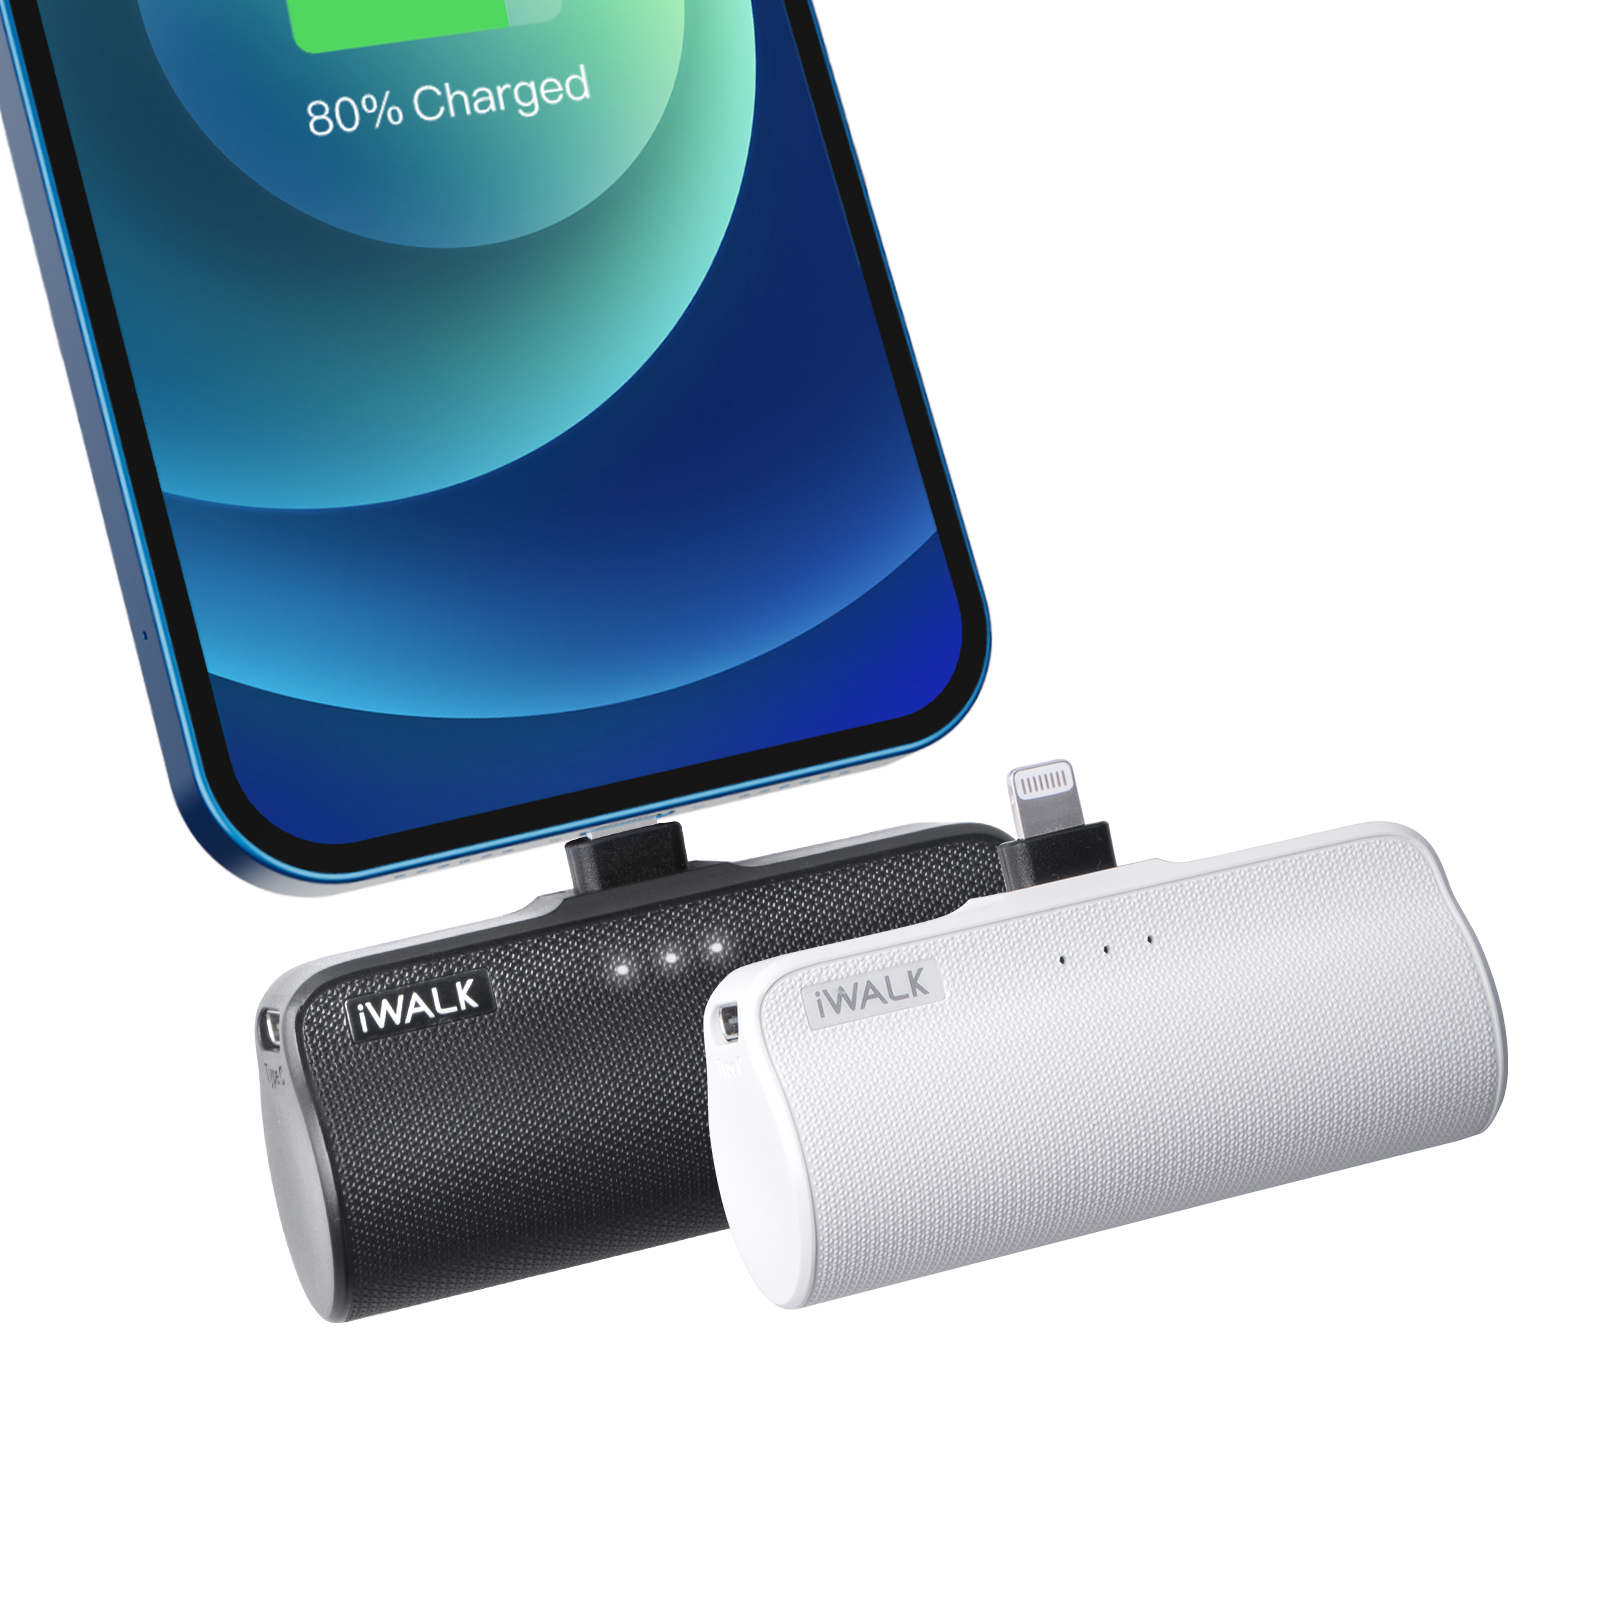 Iwalk Mini Portable Charger for iPhone with Built in Cable[Upgraded], 3350mAh Ultra-Compact Power Bank Samll Battery Pack Charger Compatible with